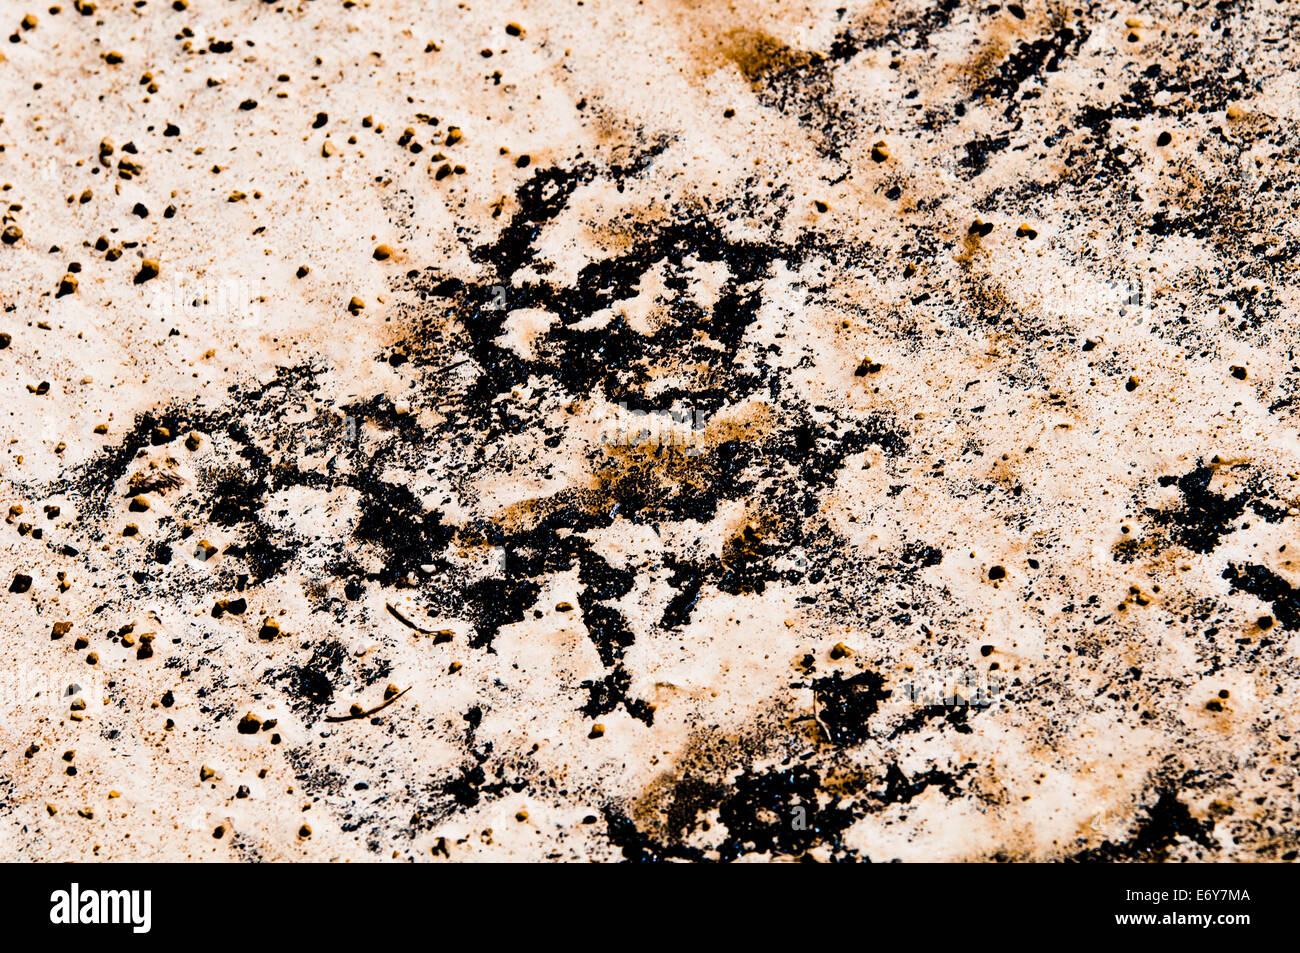 Abstract textured background of sand, rocks, and asphalt Stock Photo